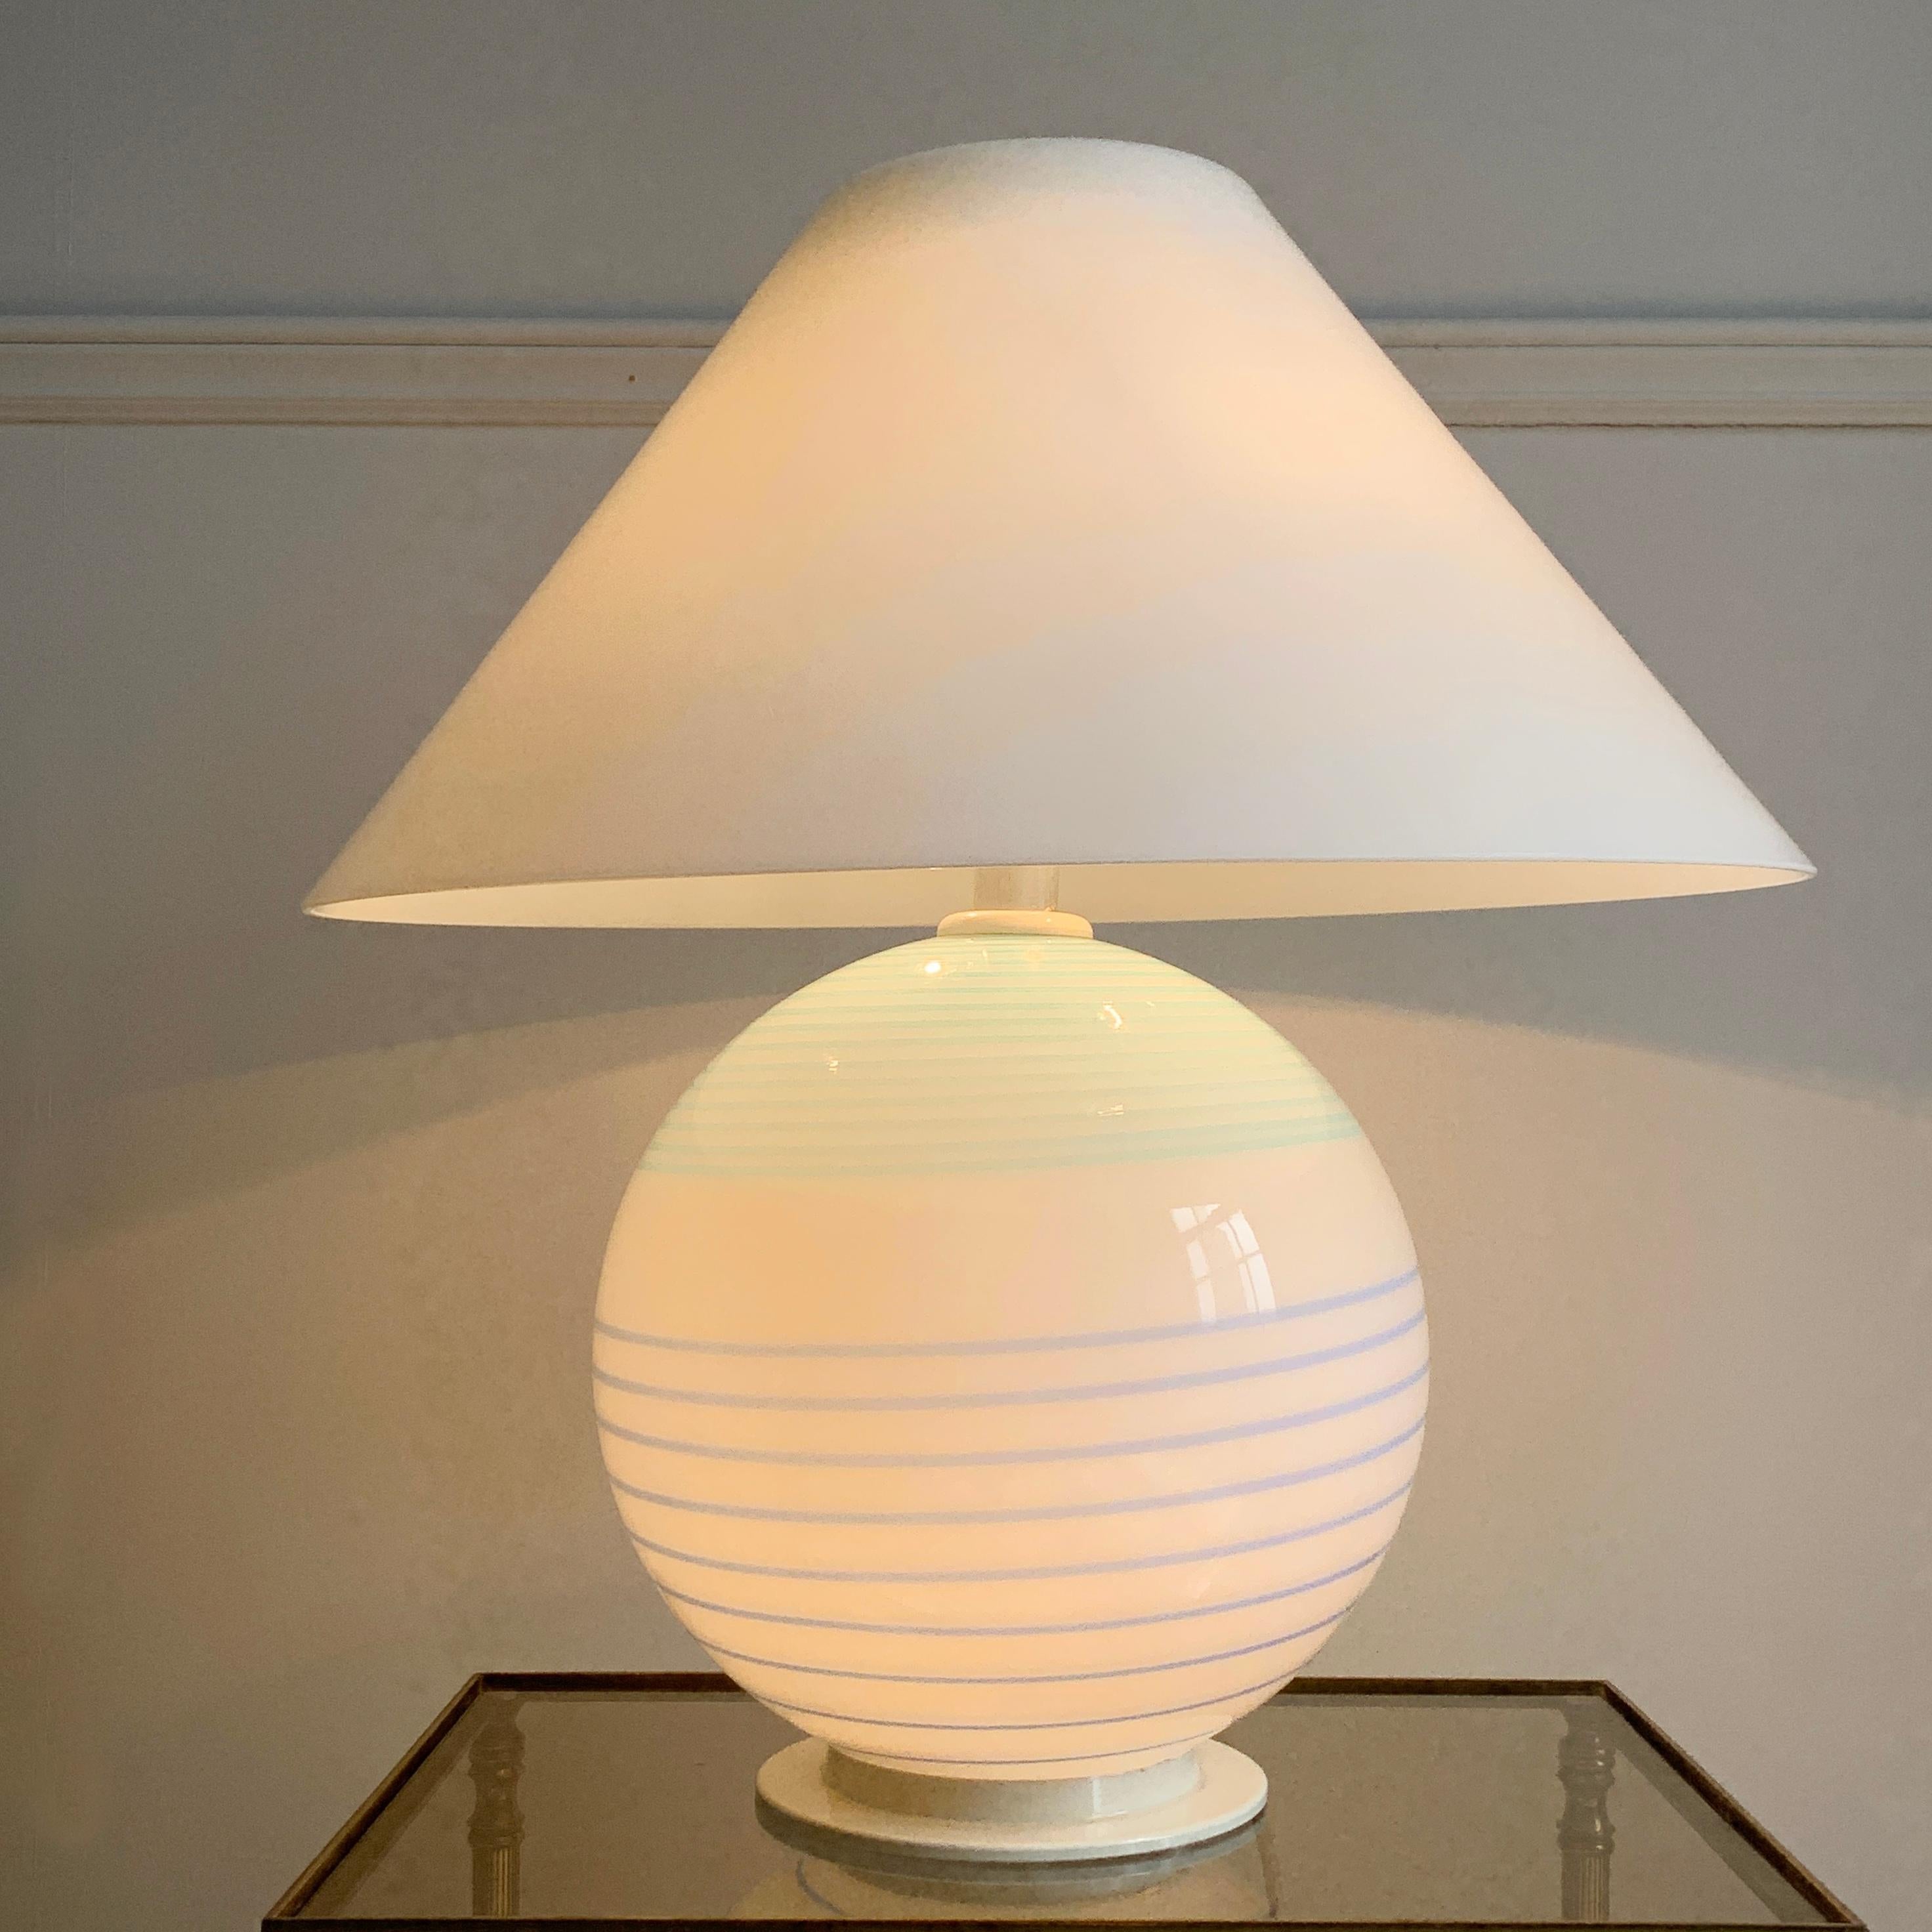 Stunning vetri Murano lamp, dating form the 1970's. Huge Murano hand blown glass swirl lamp, with glass shade. This is a truly beautiful vintage piece which illuminates both at the top, which holds two lamp holders, as well as inside the swirled